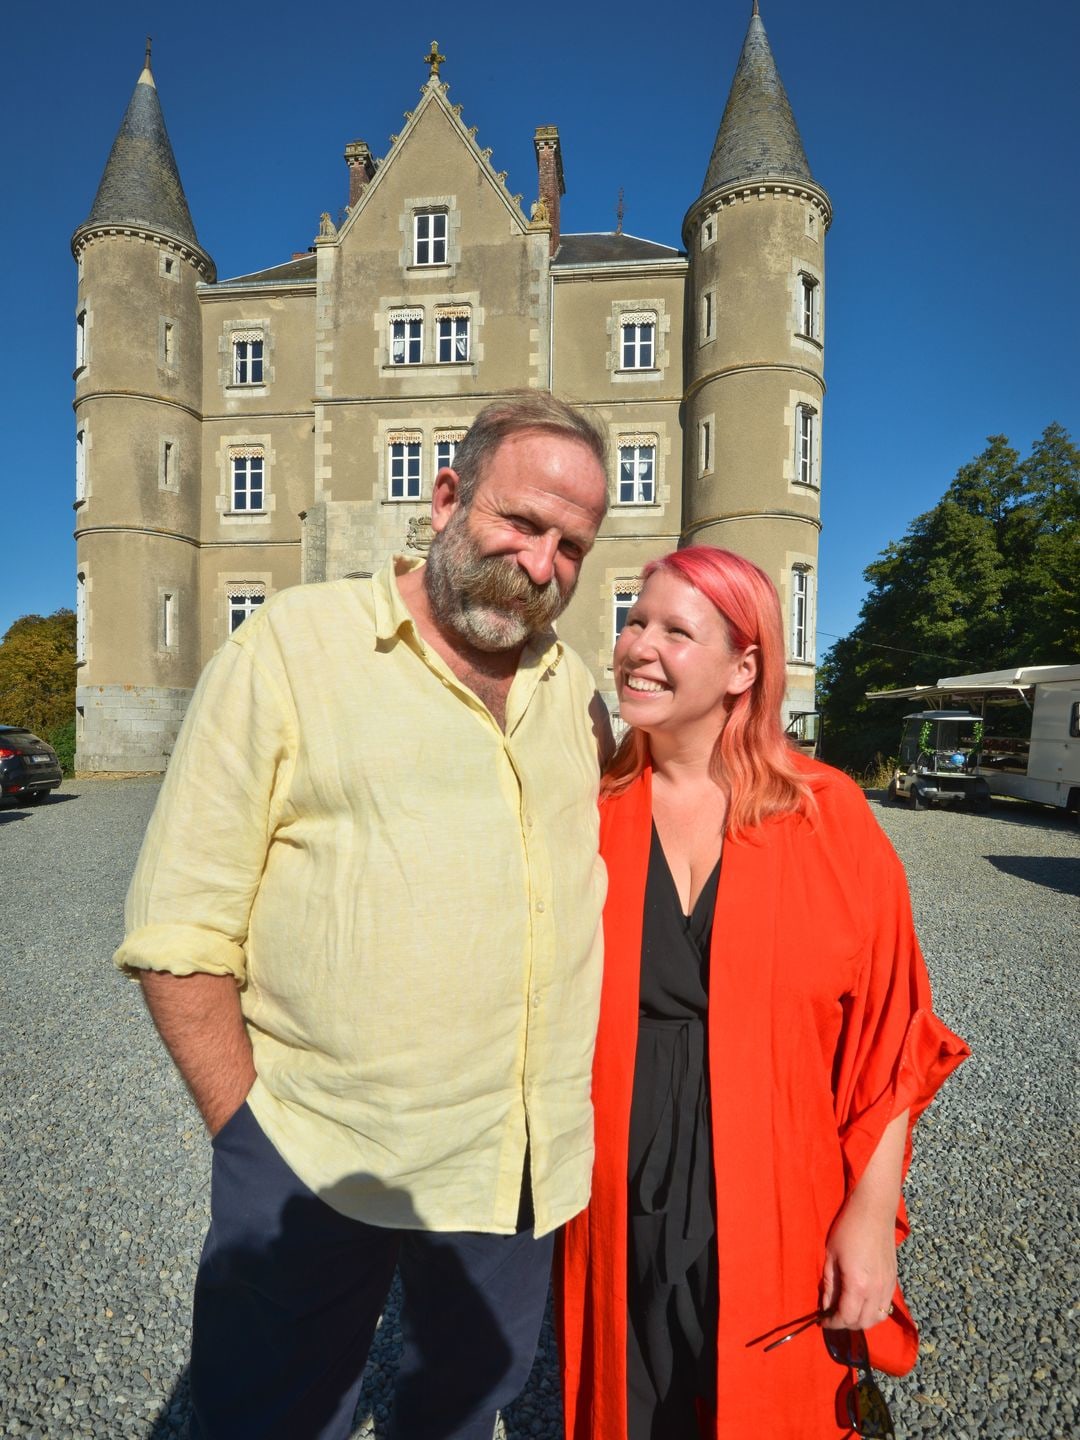 Dick and Angel Strawbridge at their home Chateau De La Motte Husson